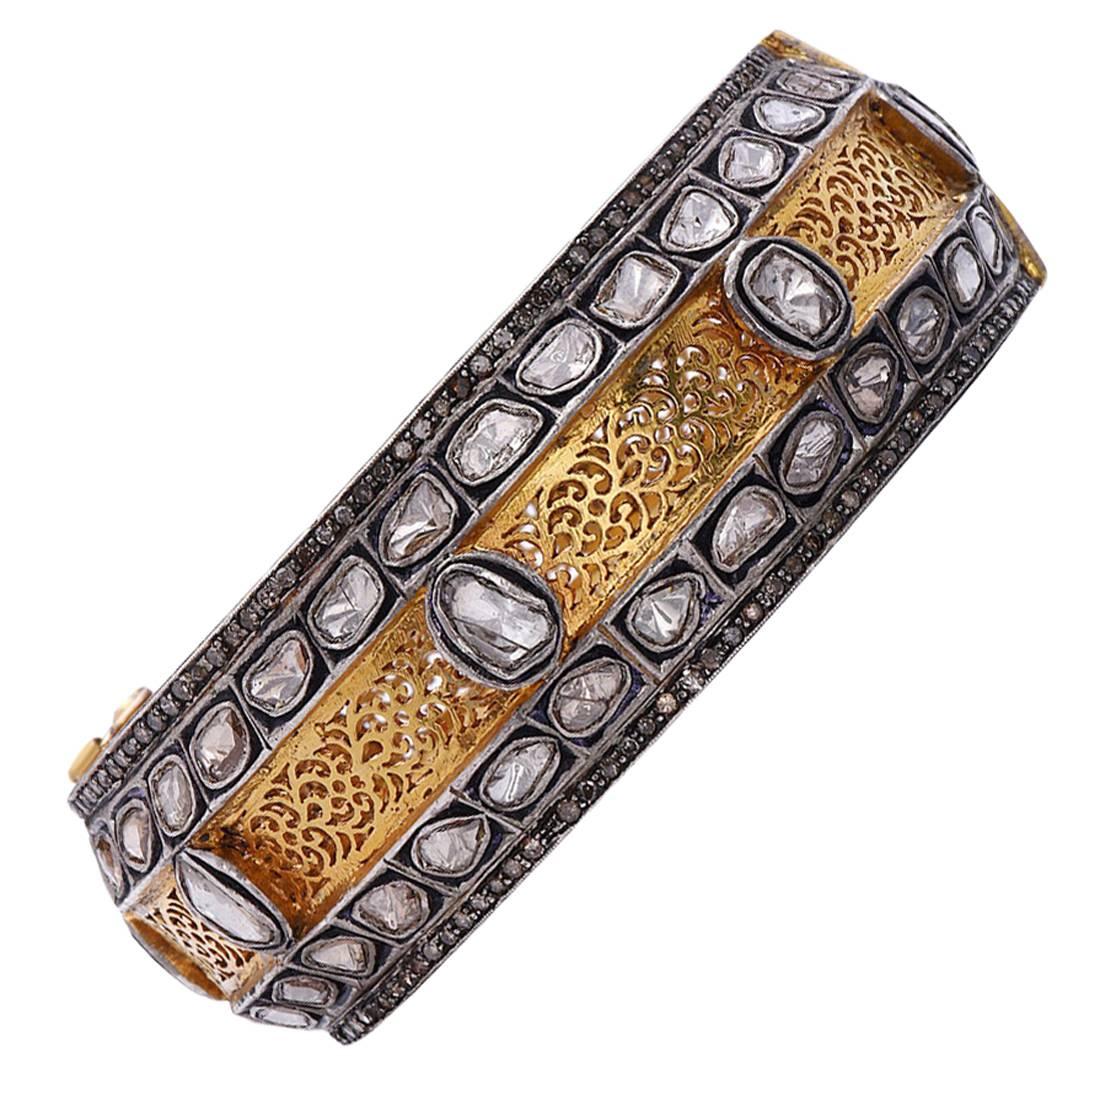 Stunningm Bangle with Rose Cut Diamonds in Gold and Silver